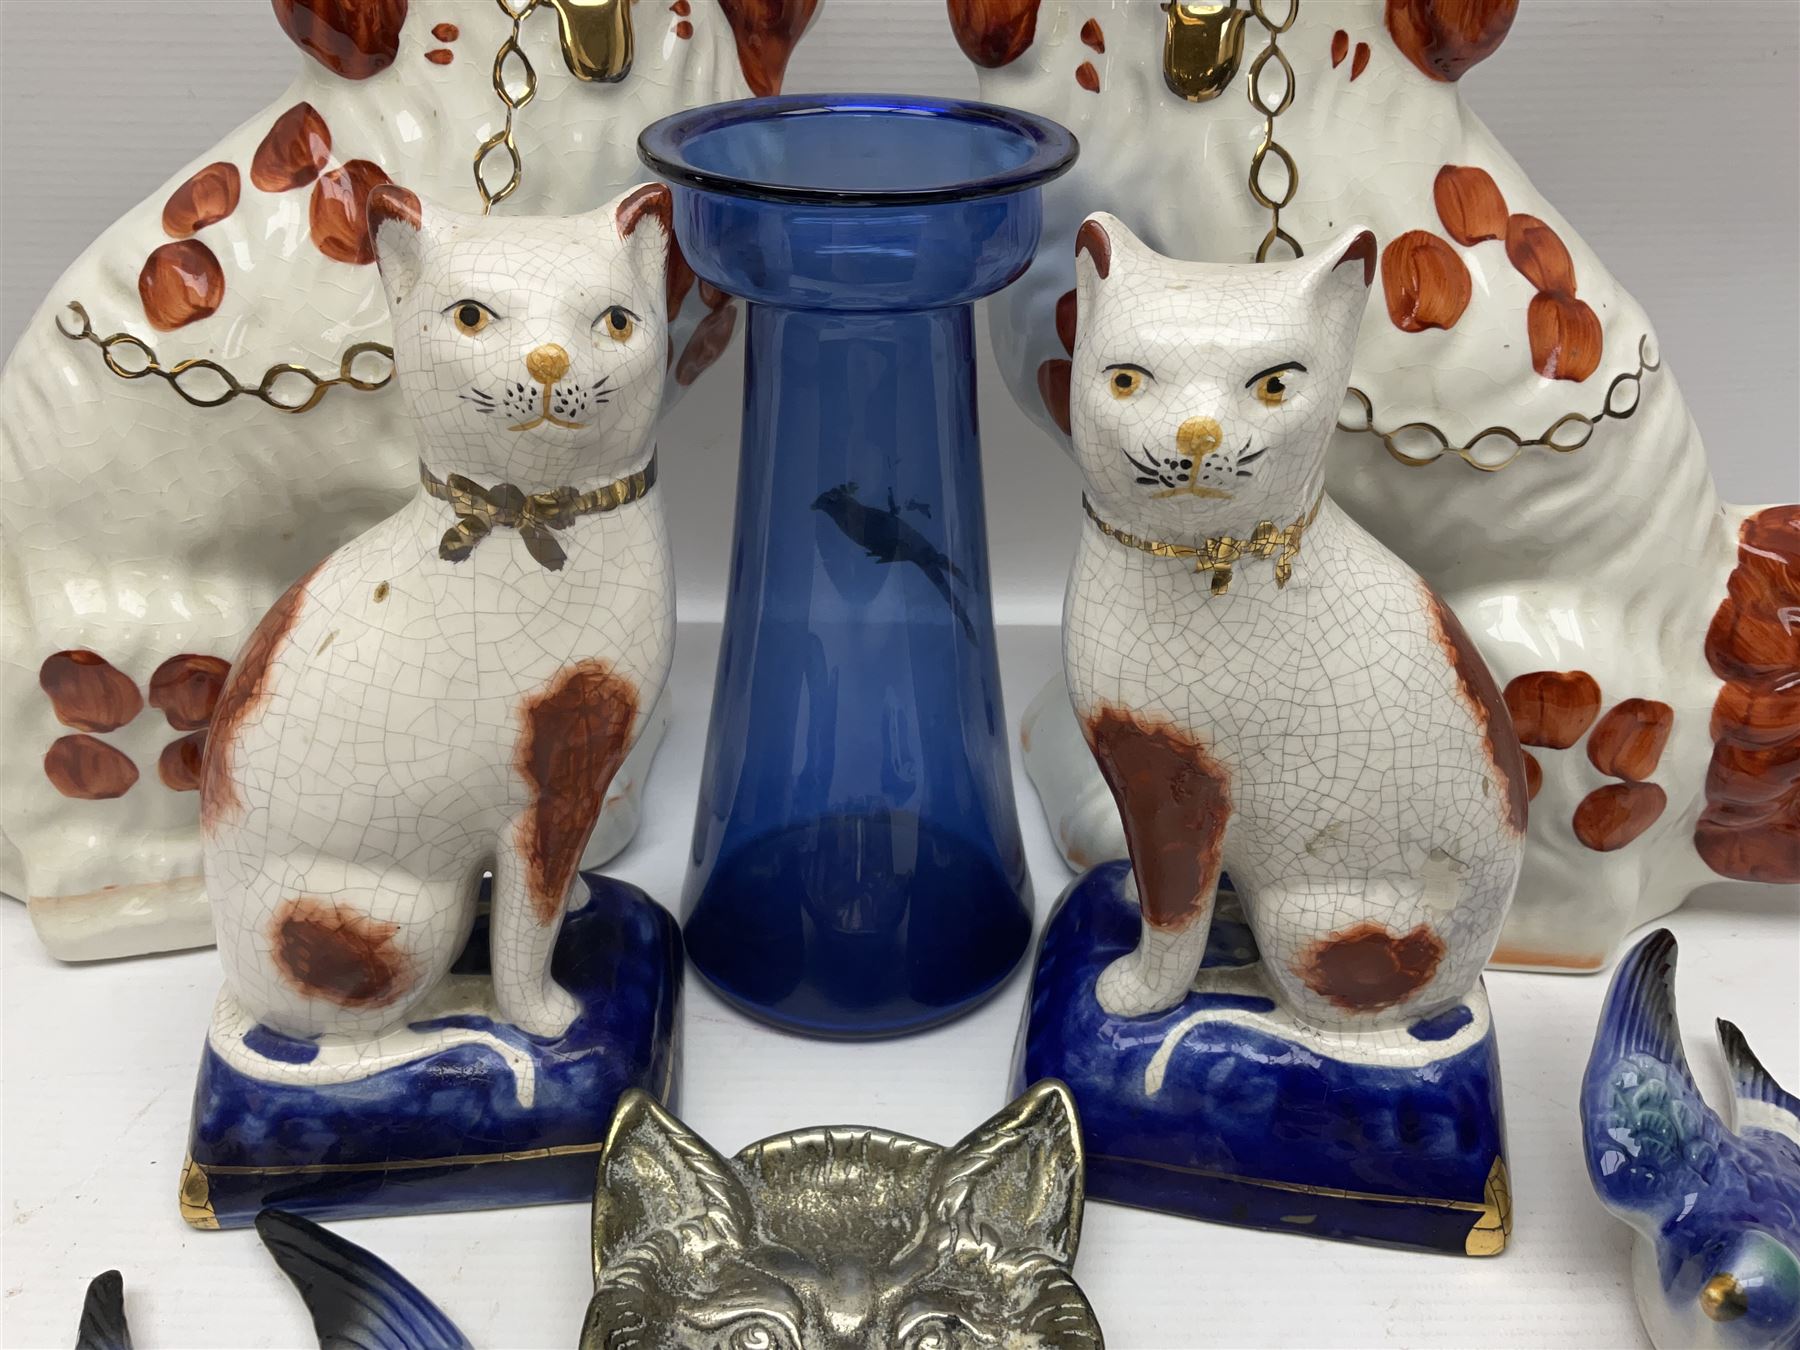 Pair of Staffordshire style dogs and a pair of Staffordshire style cats - Image 5 of 9